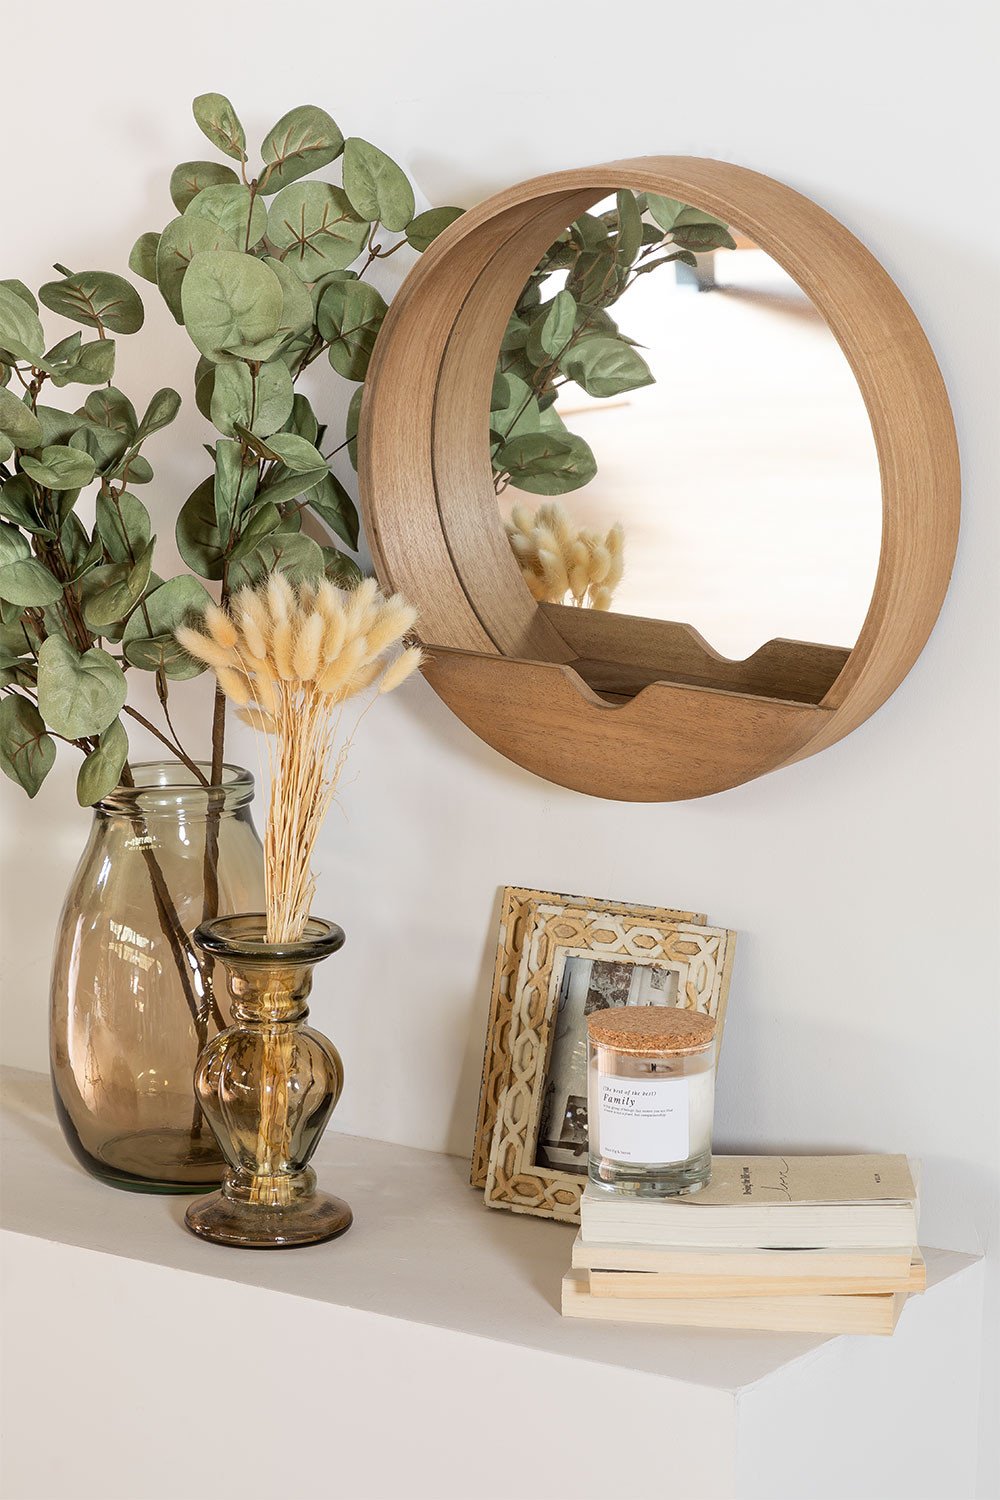 Round Wall Mirror With Wooden Shelf, Wooden Circle Mirror With Shelf